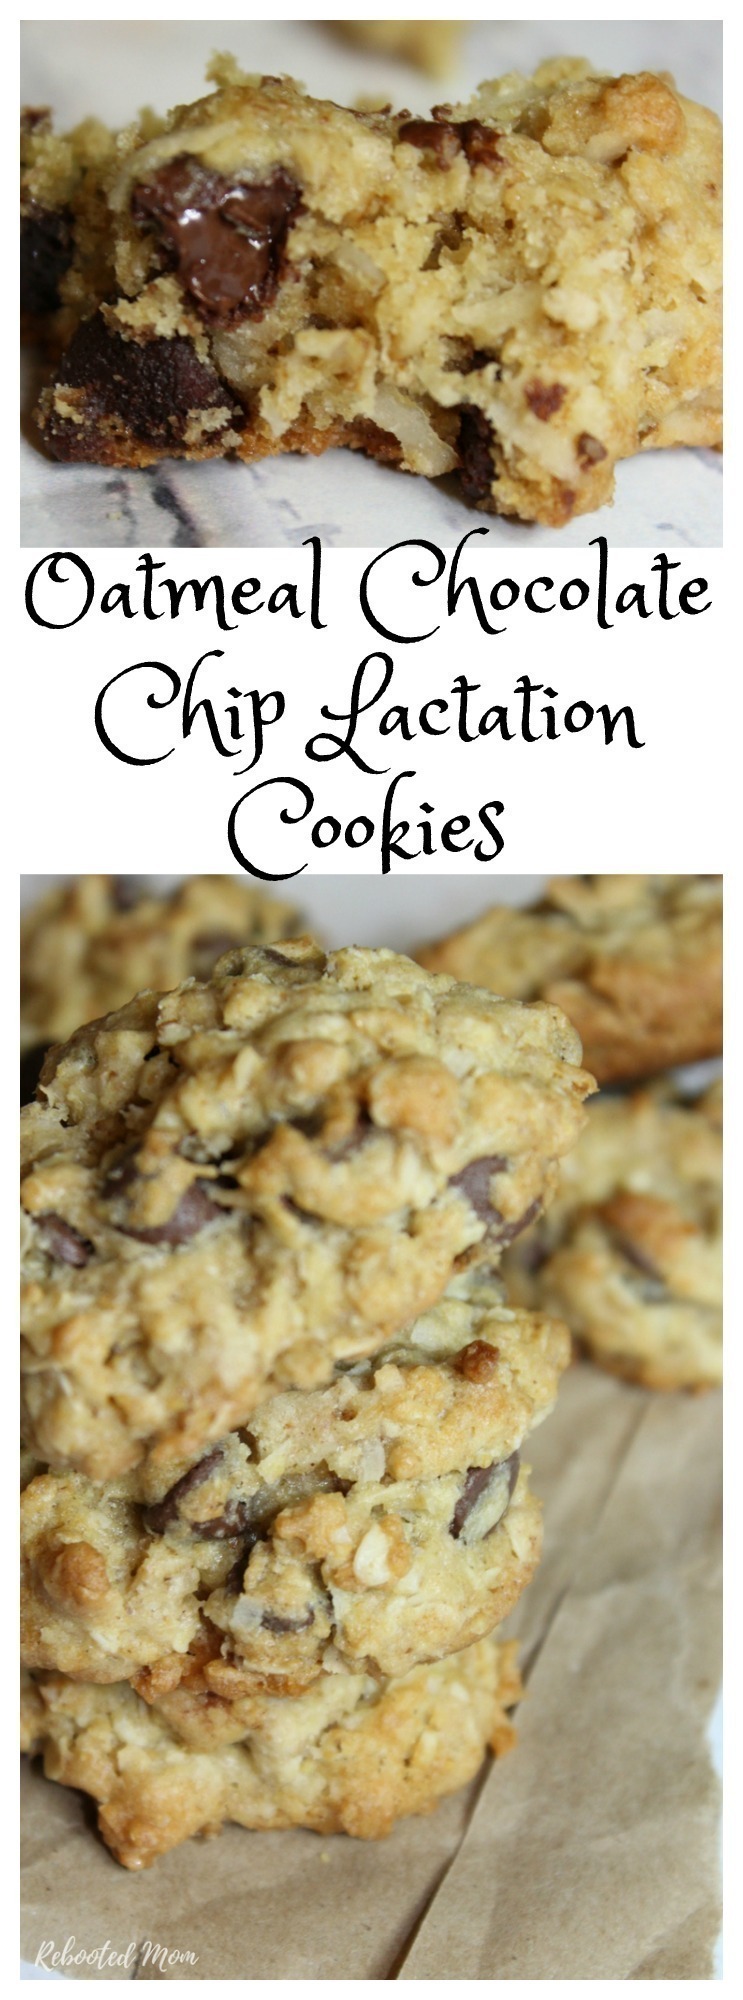 Lactation cookies are a treat for a new mommy ~ full of ingredients like brewers yeast and flaxseed meal, they are a great way to boost your milk supply and help keep you nourished the few few months after labor and delivery.